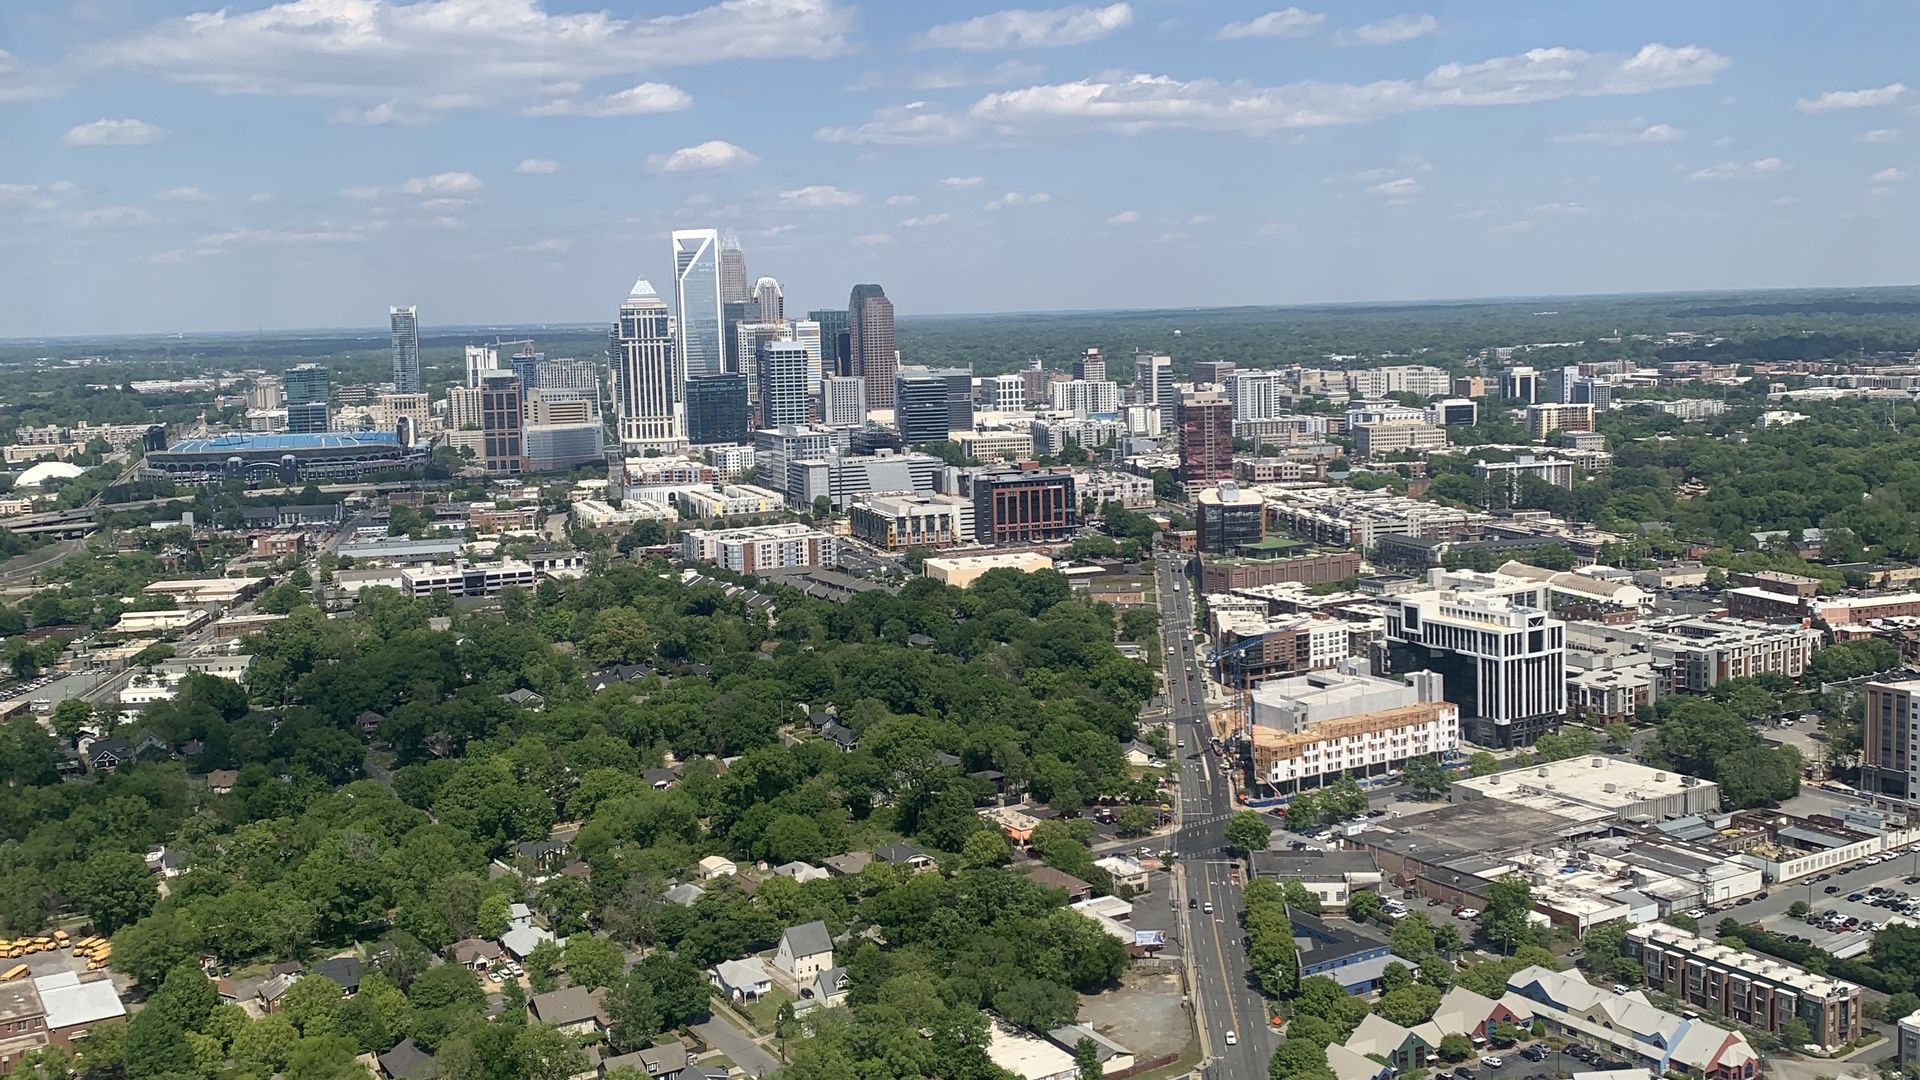 View of Charlotte skyline from the sky